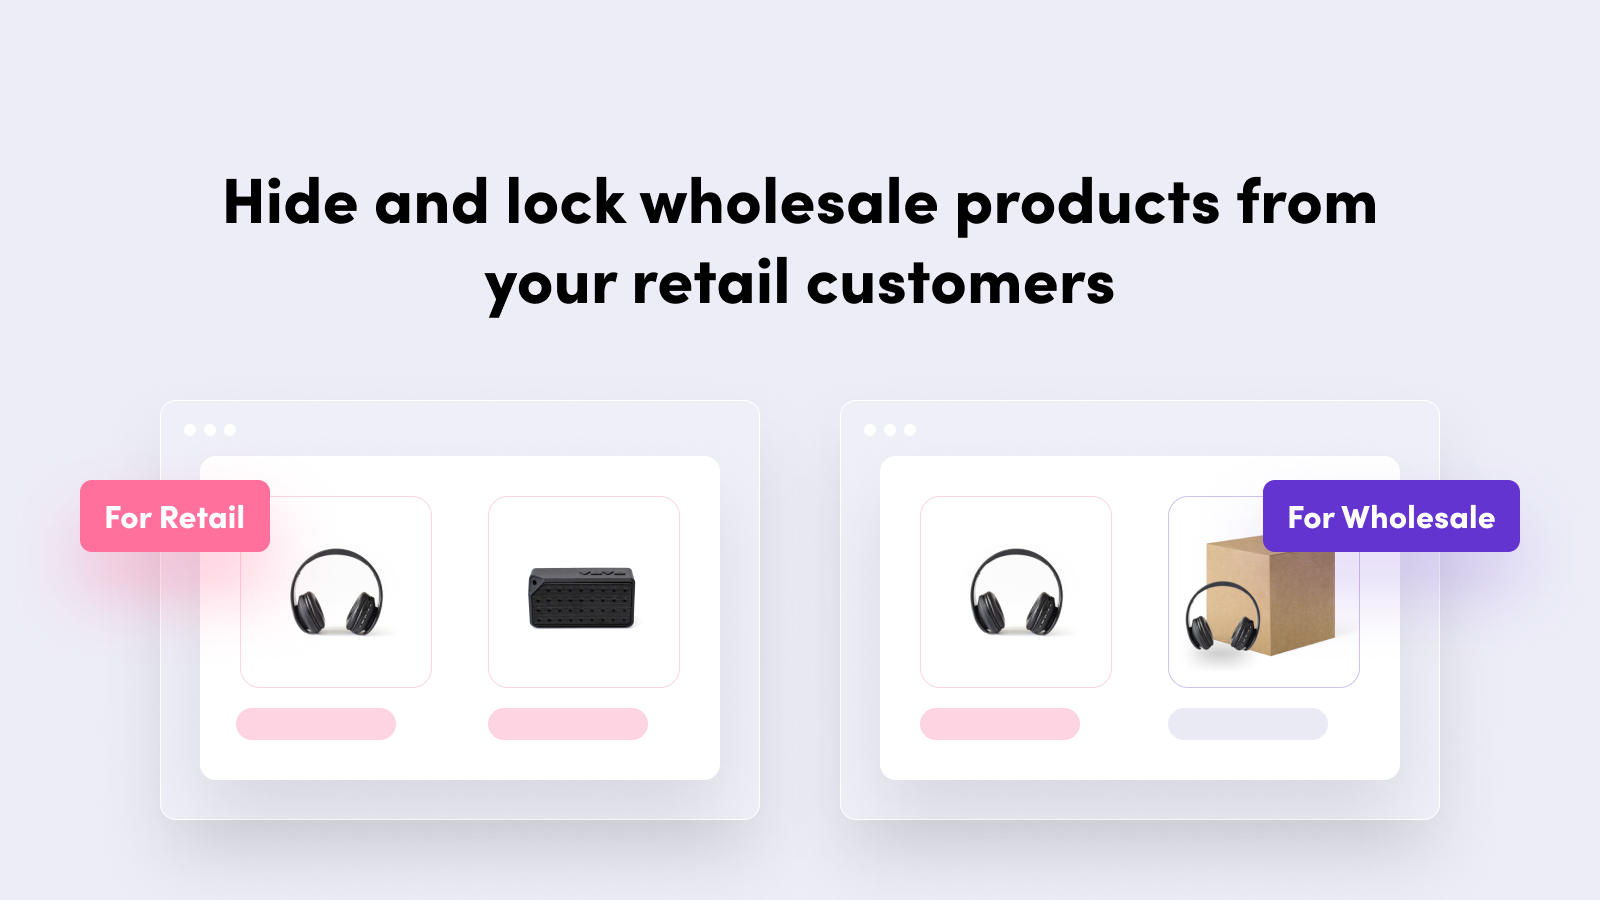 Hide and lock wholesale products from your retail customers.